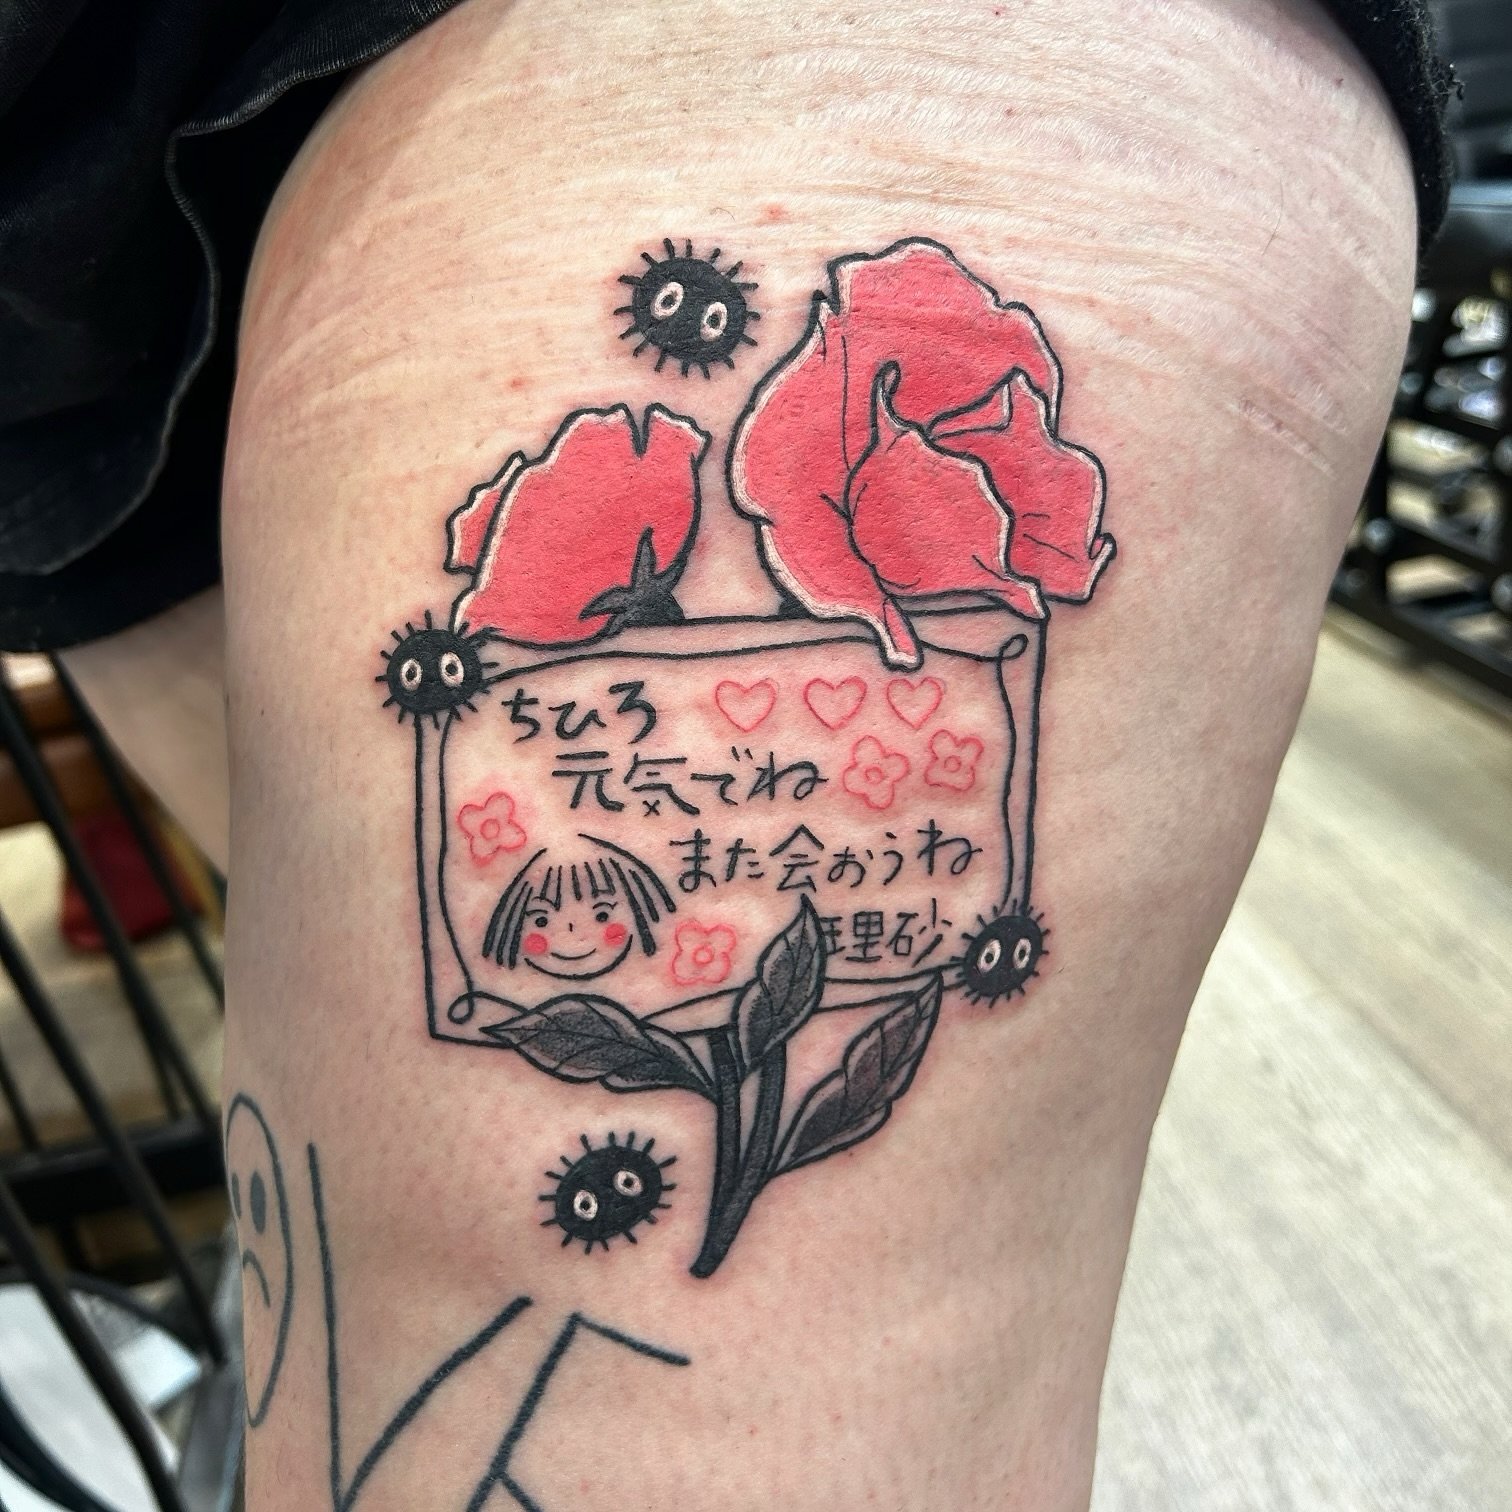 Chihiro&rsquo;s farewell by @samanthagenevera 
Sam takes bookings via her booking link in her bio, or DM the shop page and we&rsquo;ll get it sorted! 
&bull;
&bull;
&bull;
&bull;
&bull;
#new #fyp #tradtattoo #goldcoast #goldcoasttattoo #visitgoldcoas